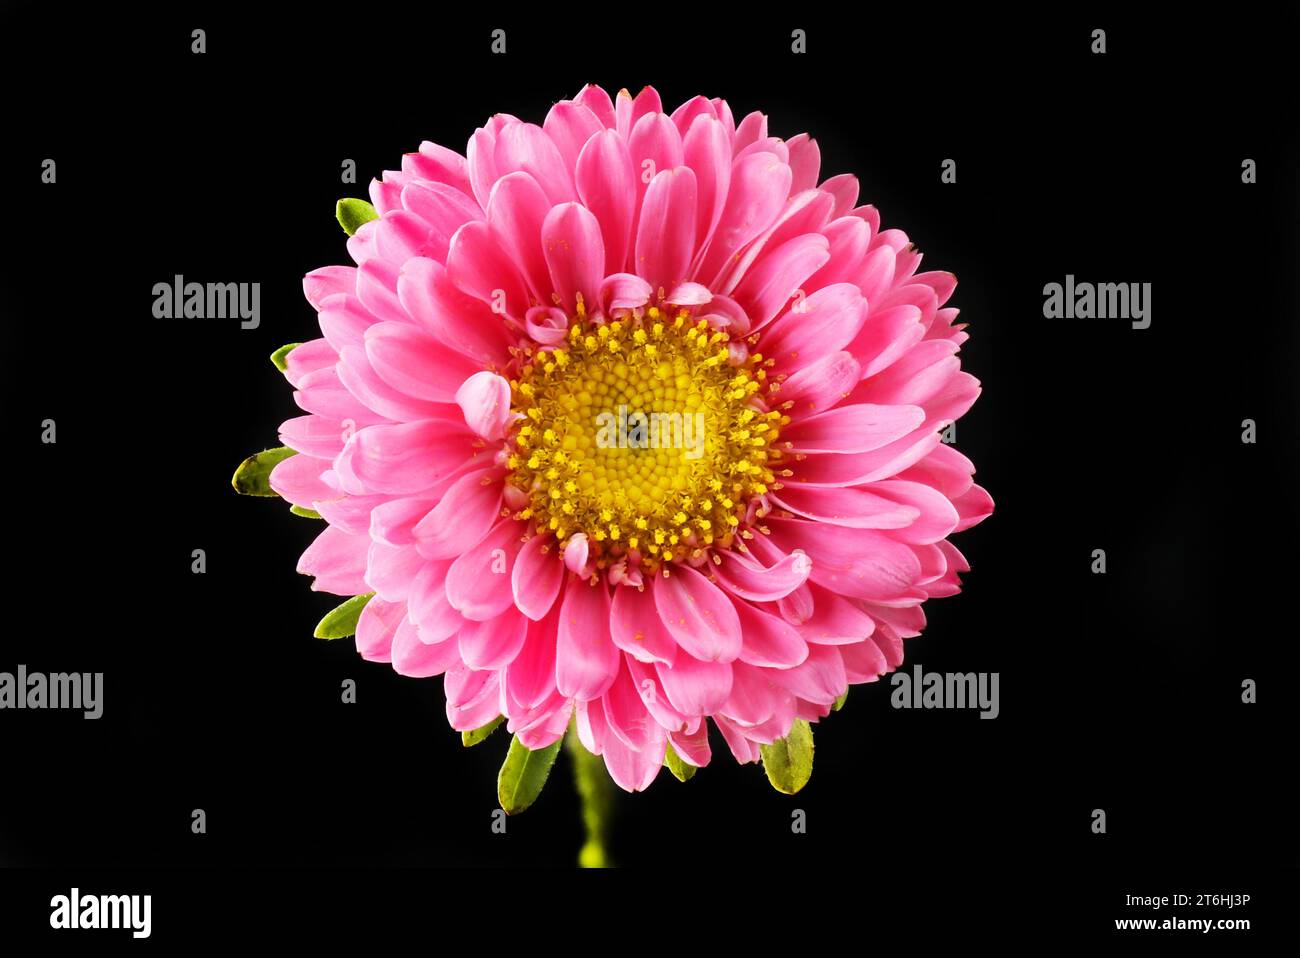 Pink and yellow aster flower isolated against black Stock Photo